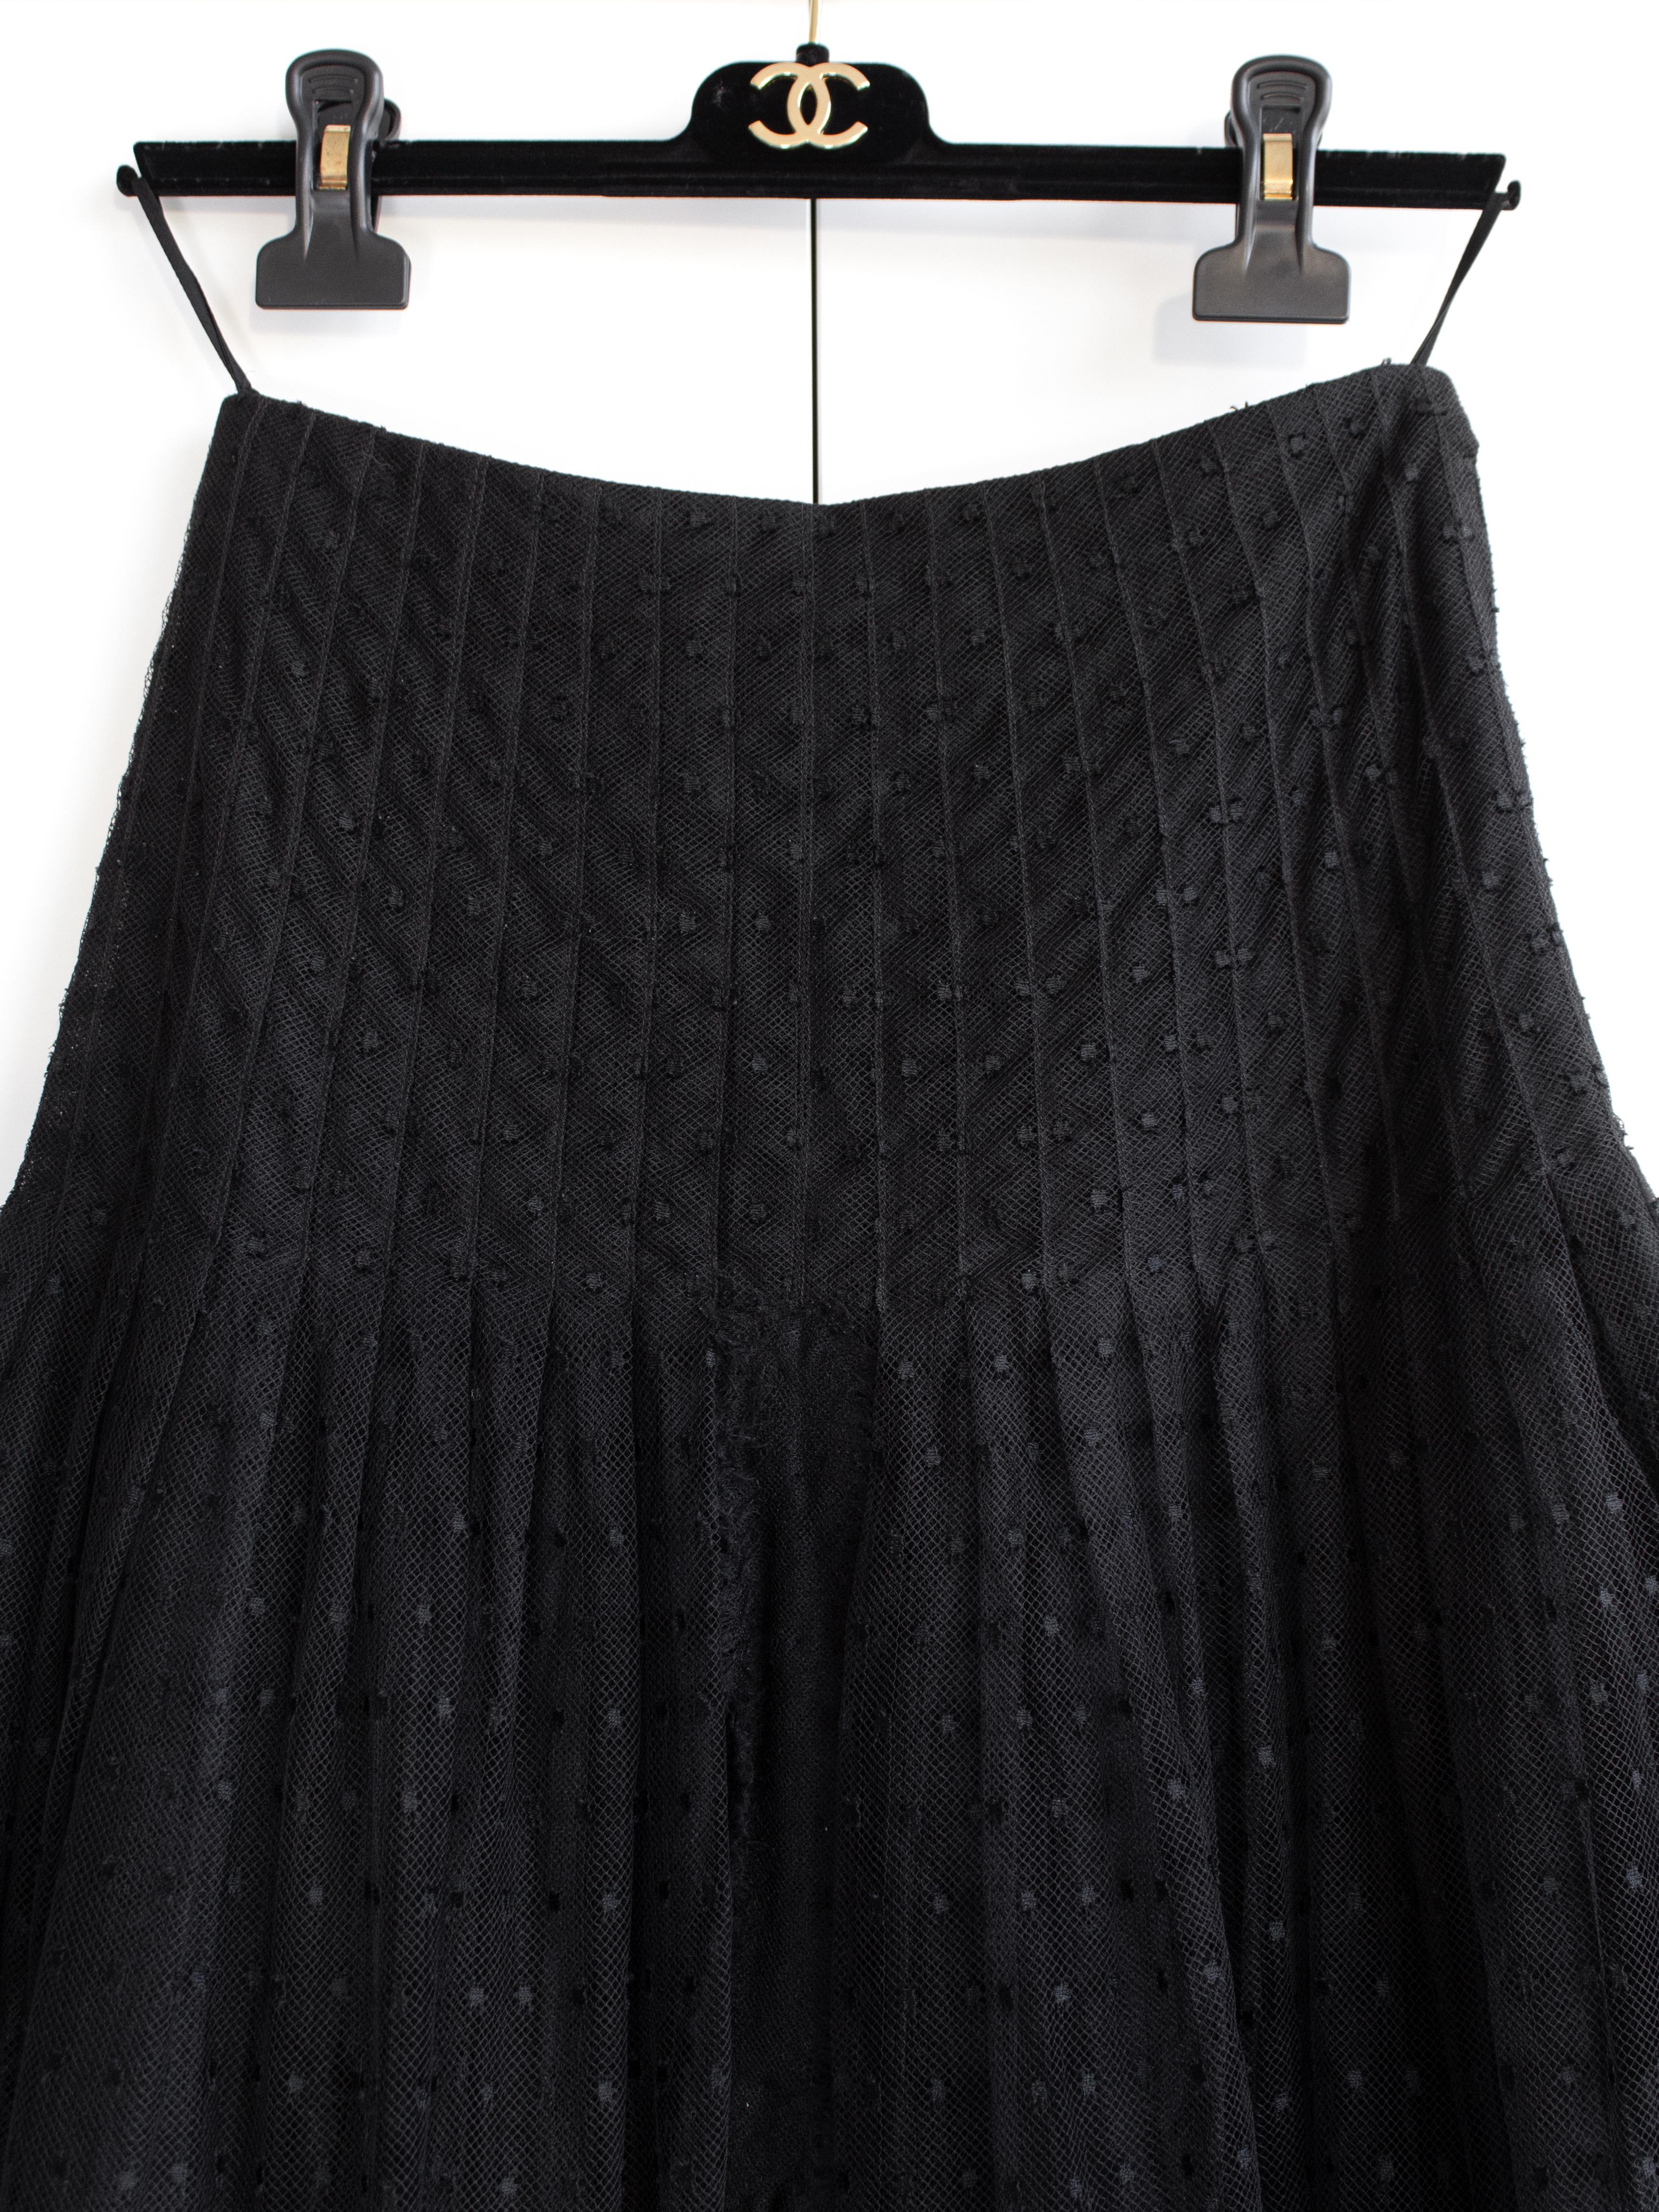 Chanel Vintage Haute Couture Fall/Winter 2003 Black Swiss Dot Tulle Skirt For Sale 3